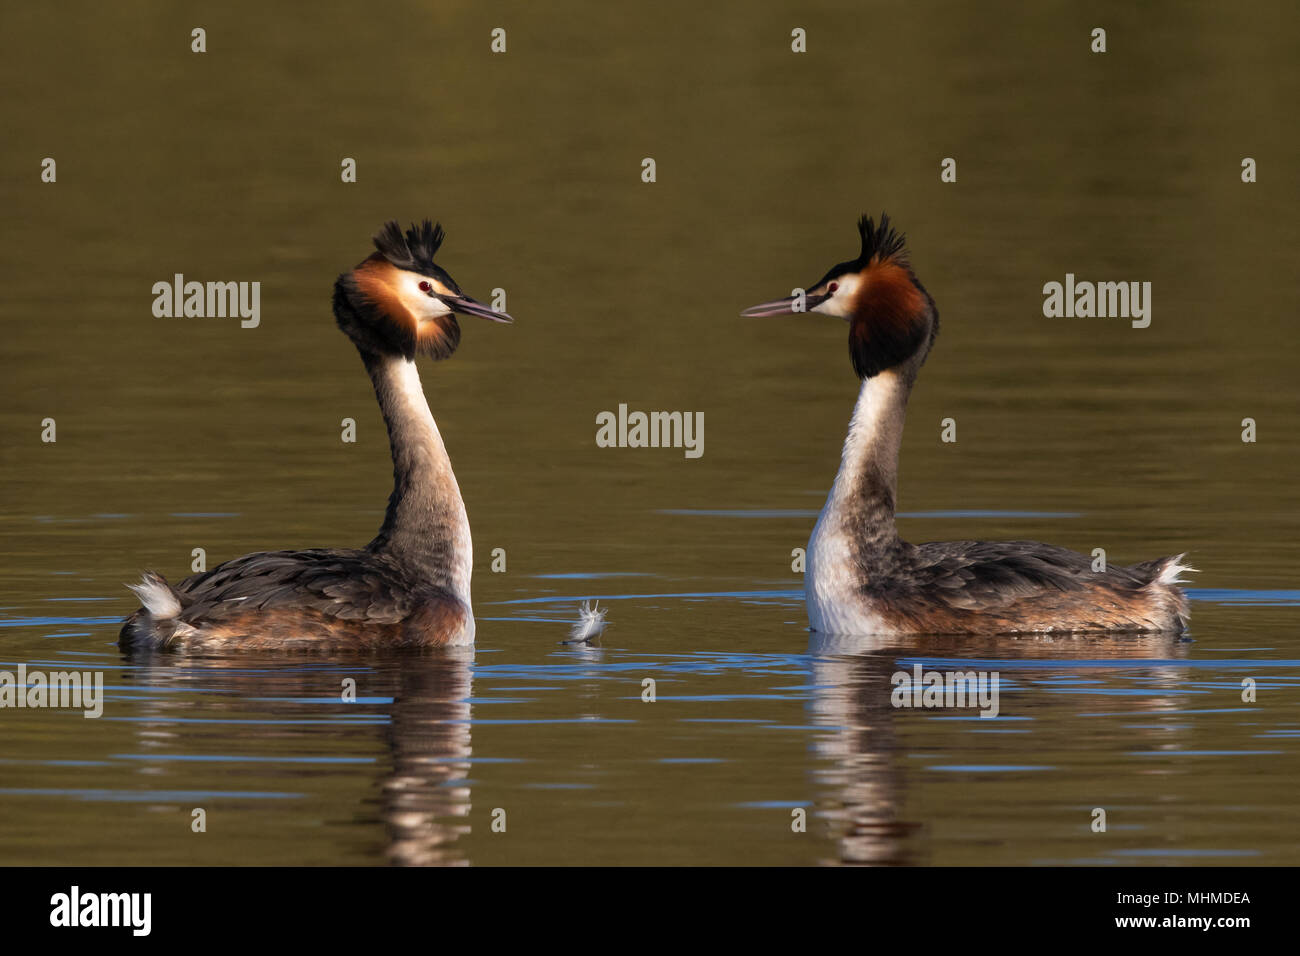 pair of Great Crested Grebes (Podiceps cristatus) facing each other at the start of their courtship display Stock Photo